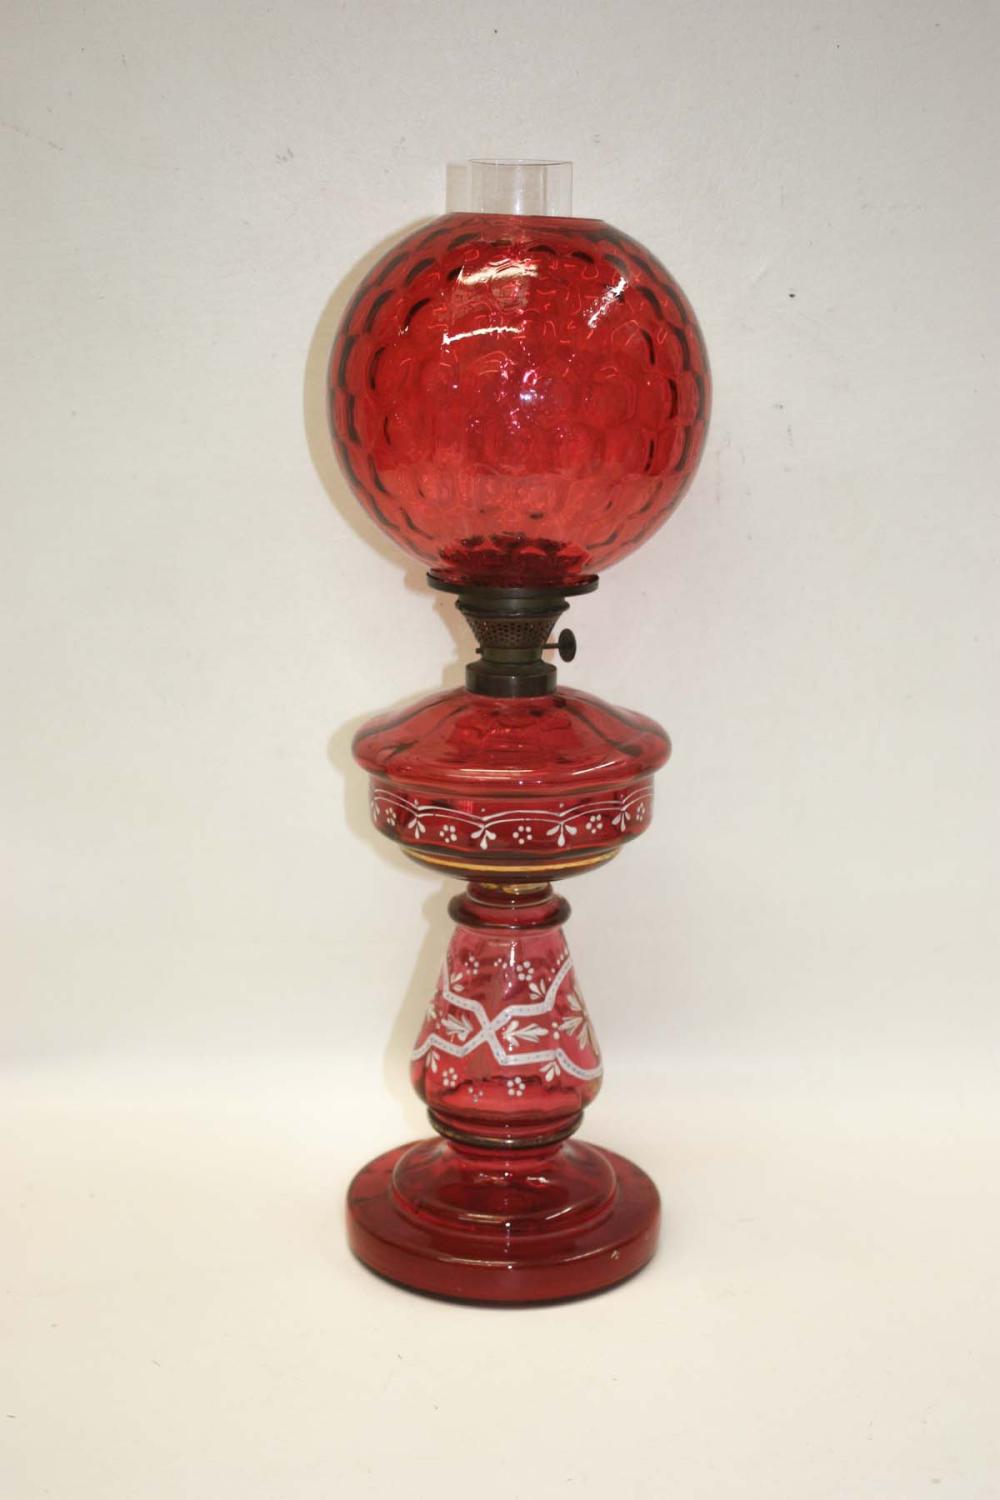 CRANBERRY GLASS OIL LAMP, THE BASE